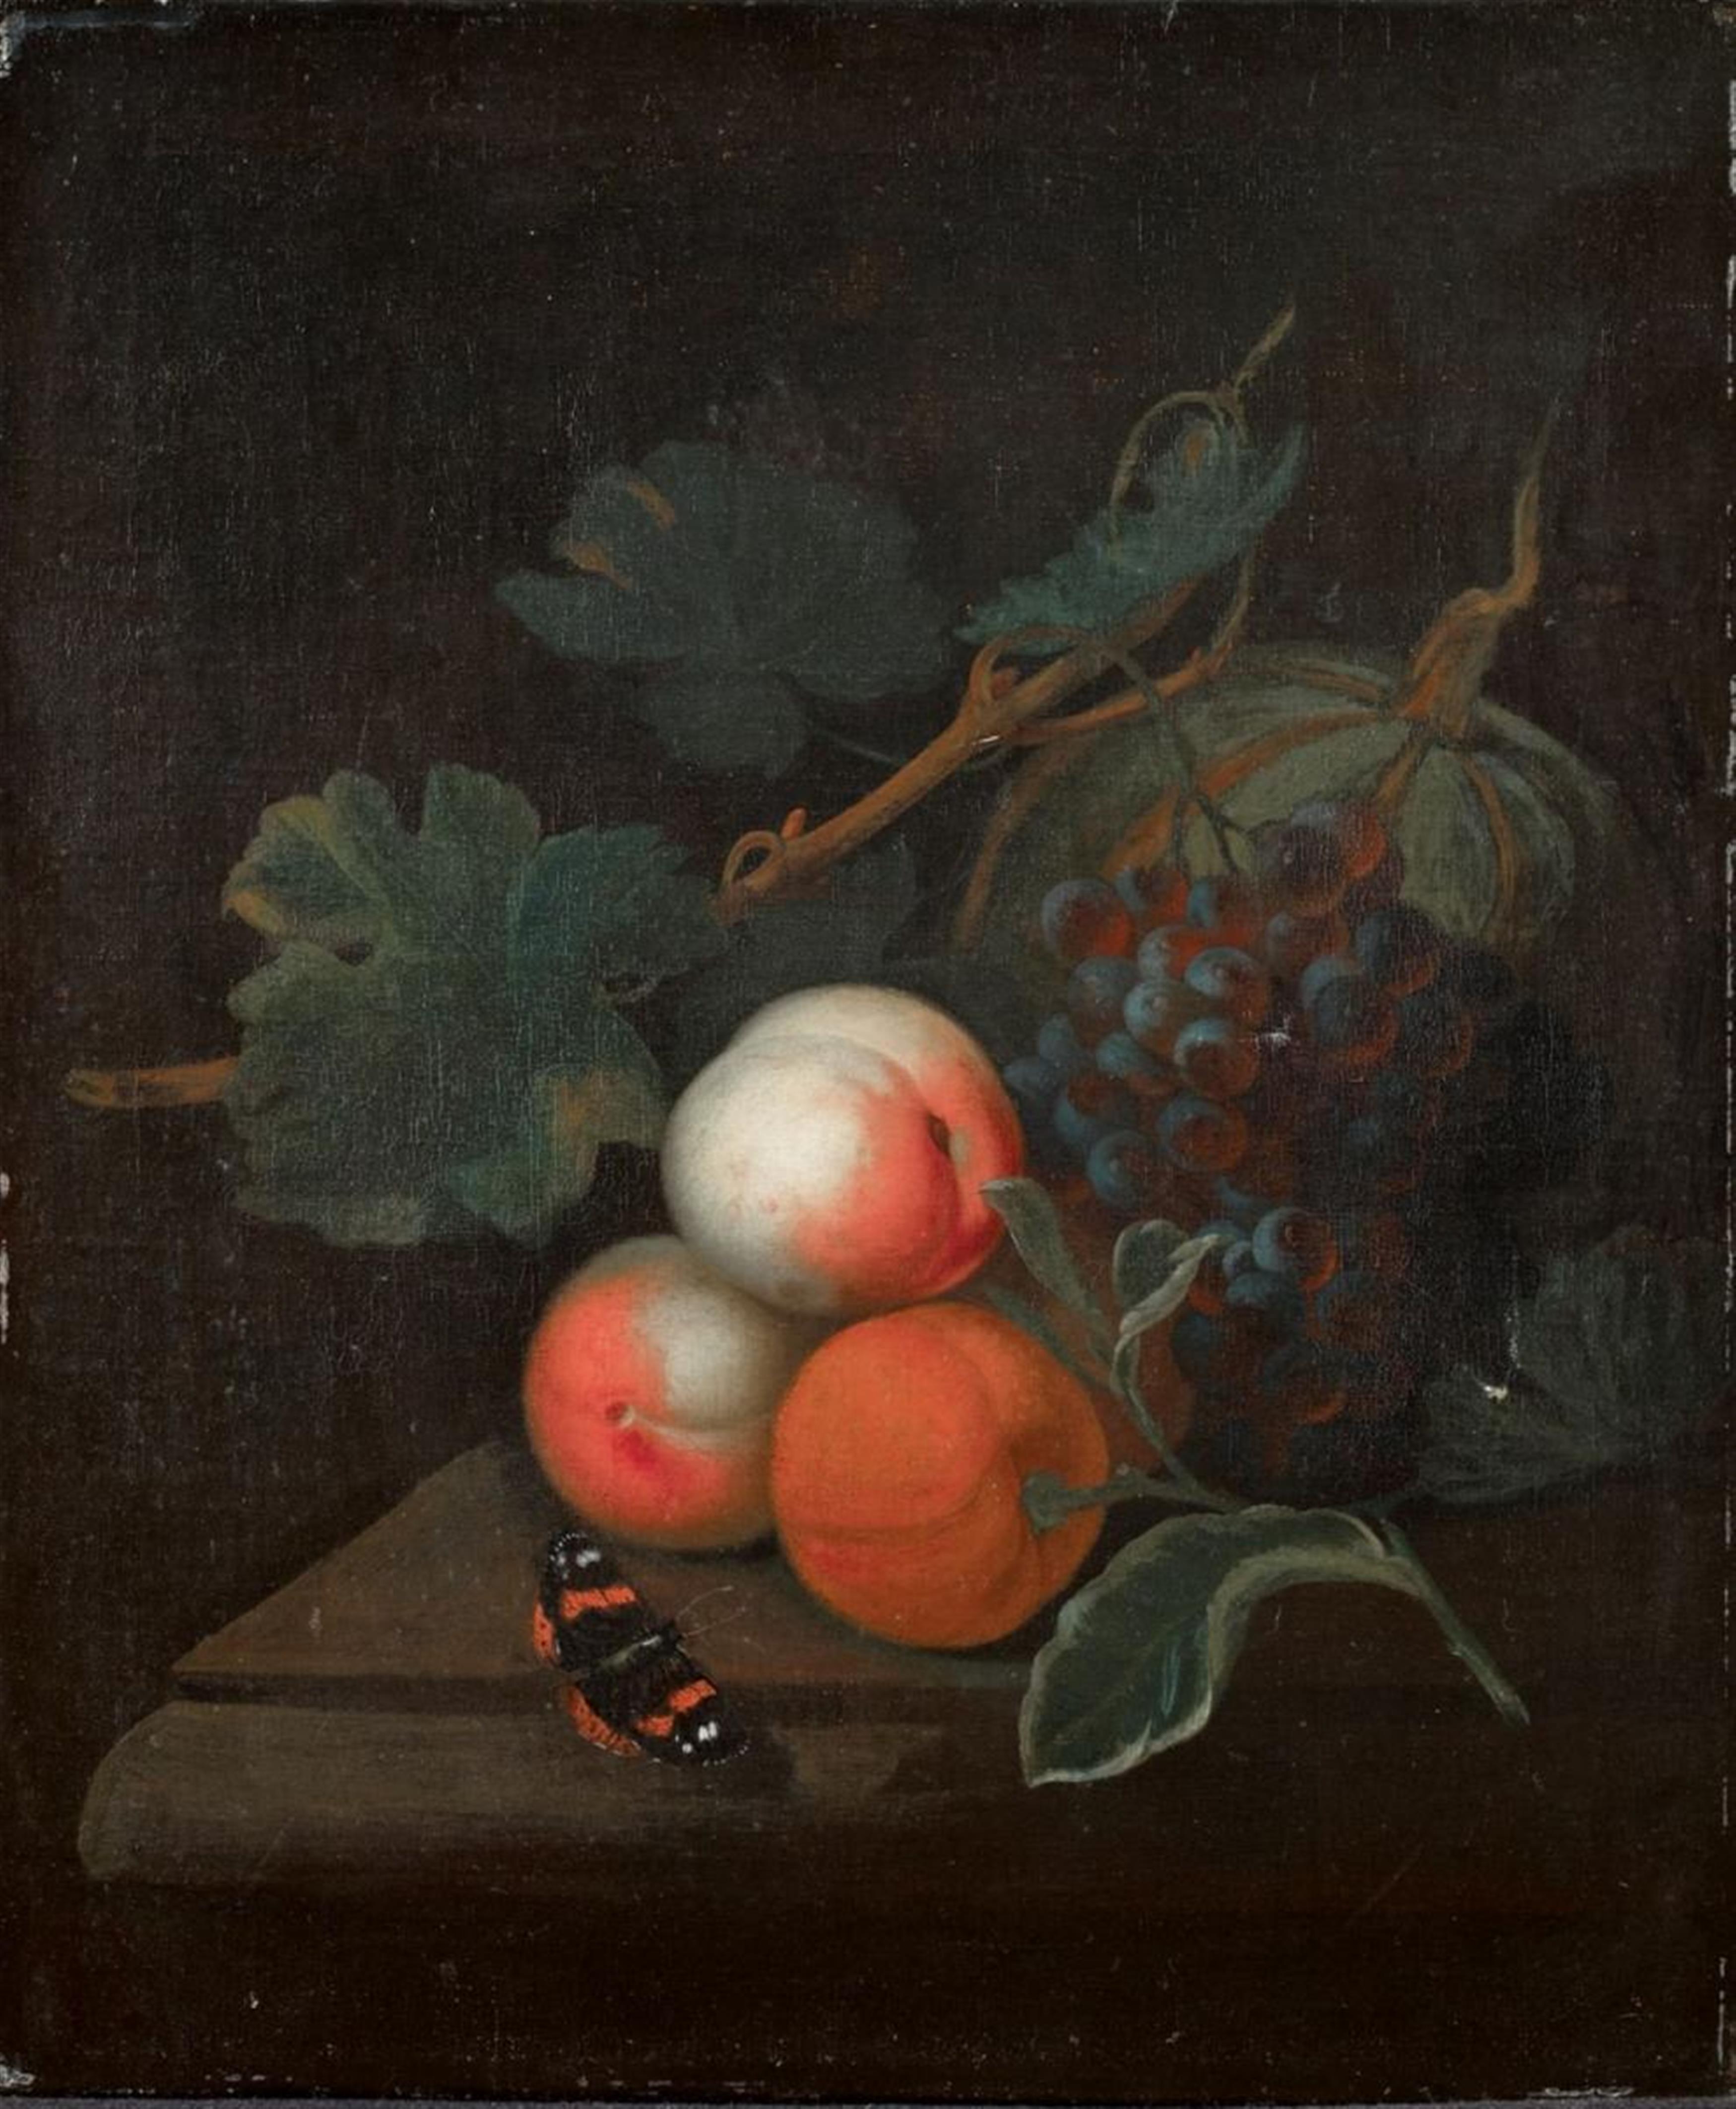 Dutch School, 17th century - STILL LIFE WITH FRUITS, VEGETABLES, AND BUTTERFLY - image-1